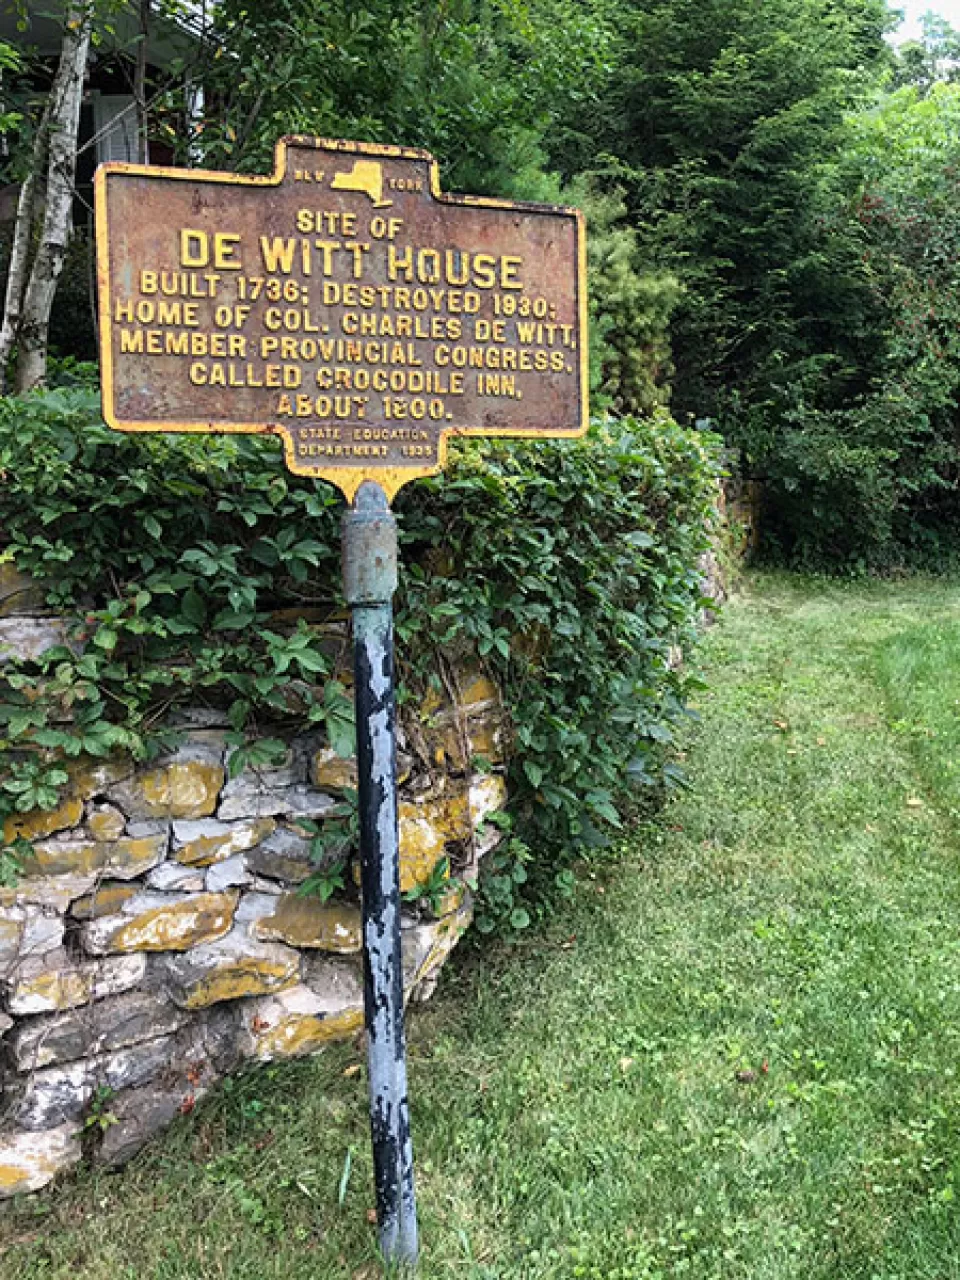 Sign marking the site of the De Witt house in New York.